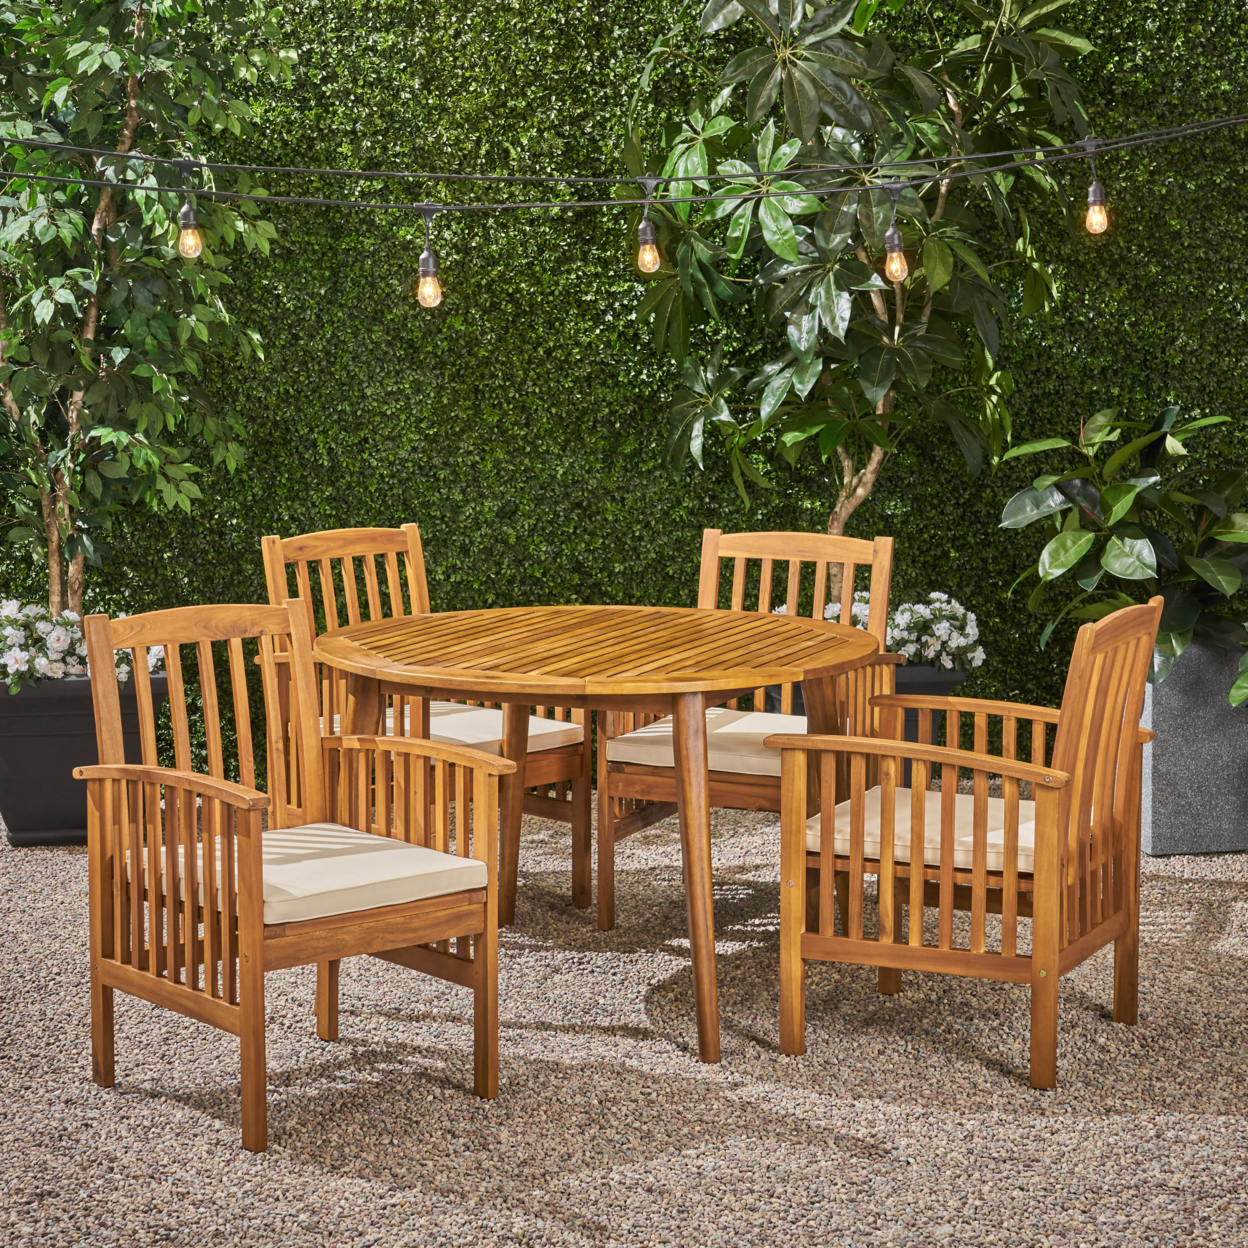 Phoenix Outdoor Acacia 4-Seater Dining Set With Cushions And 47 Round Table With Straight Legs - Gray / Cream